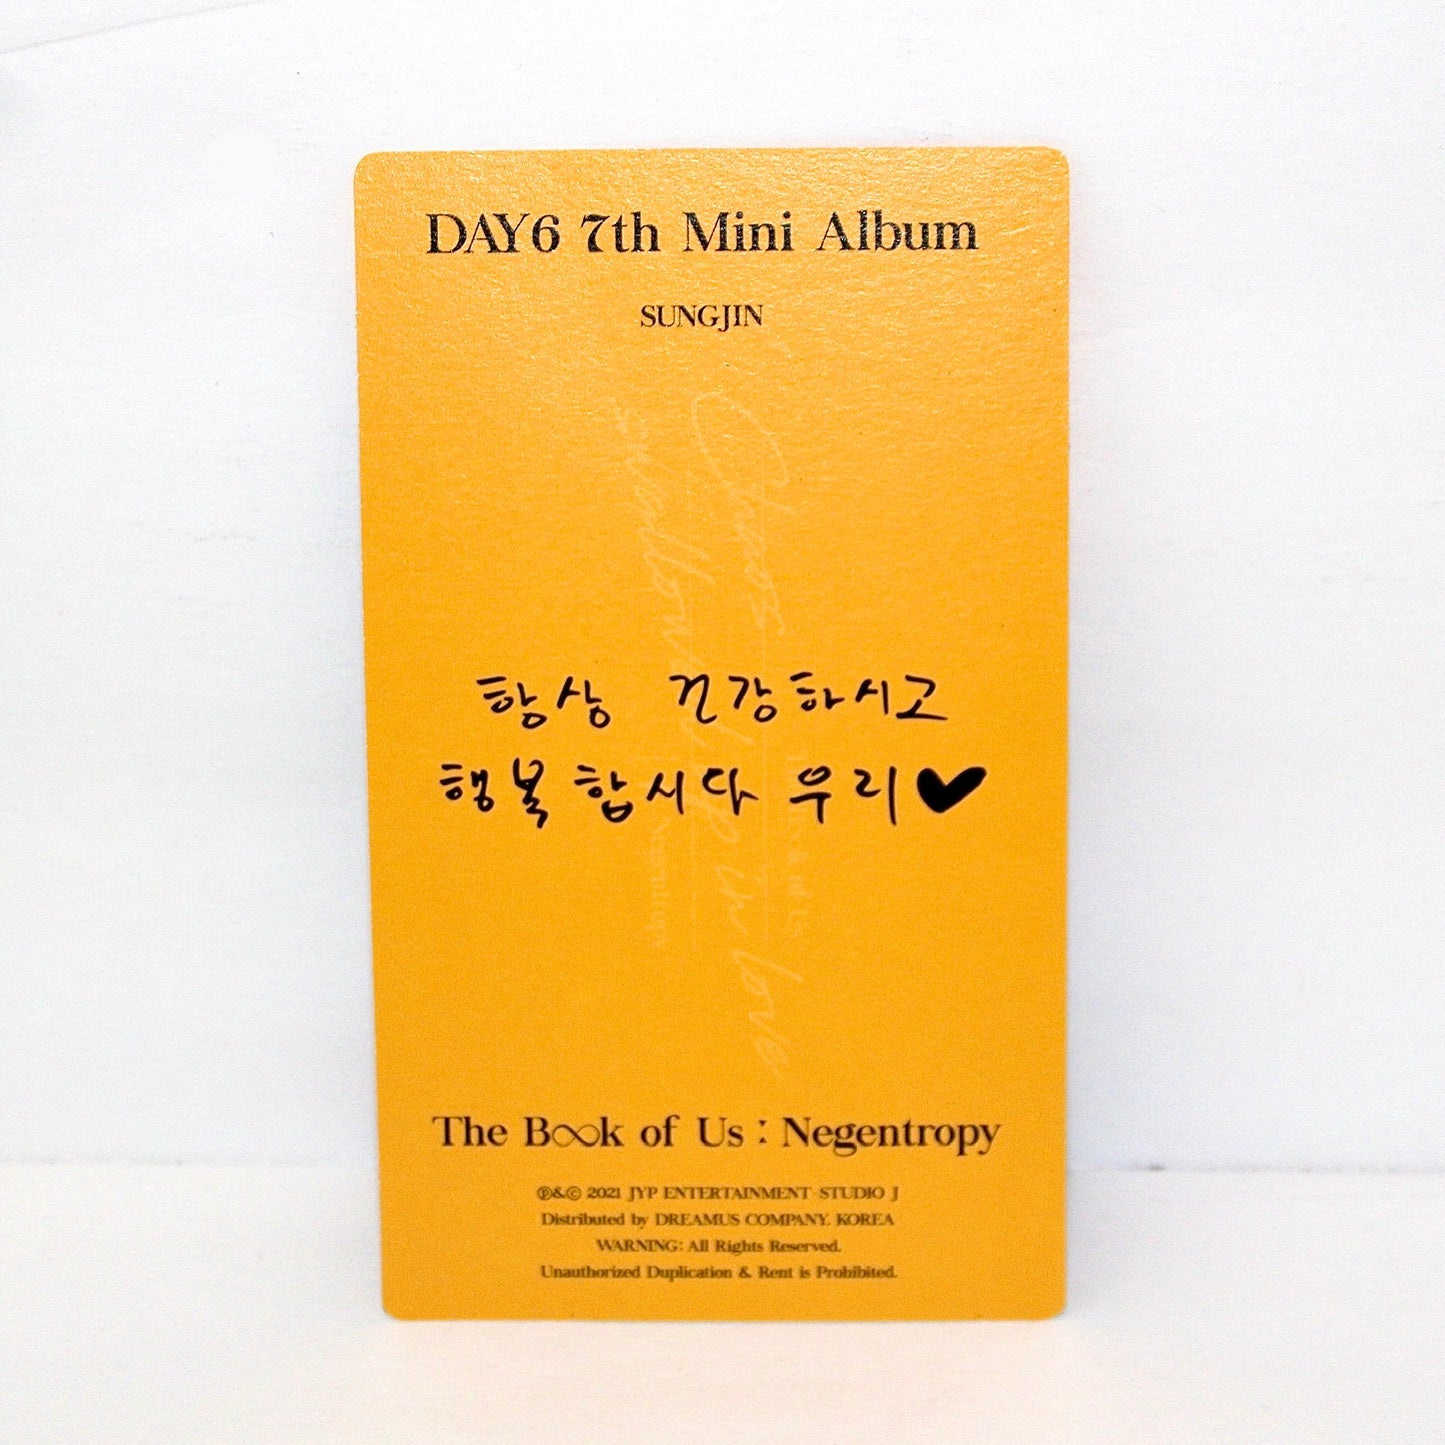 DAY6 7th Mini Album - The Book of Us: Negentropy | Inclusions